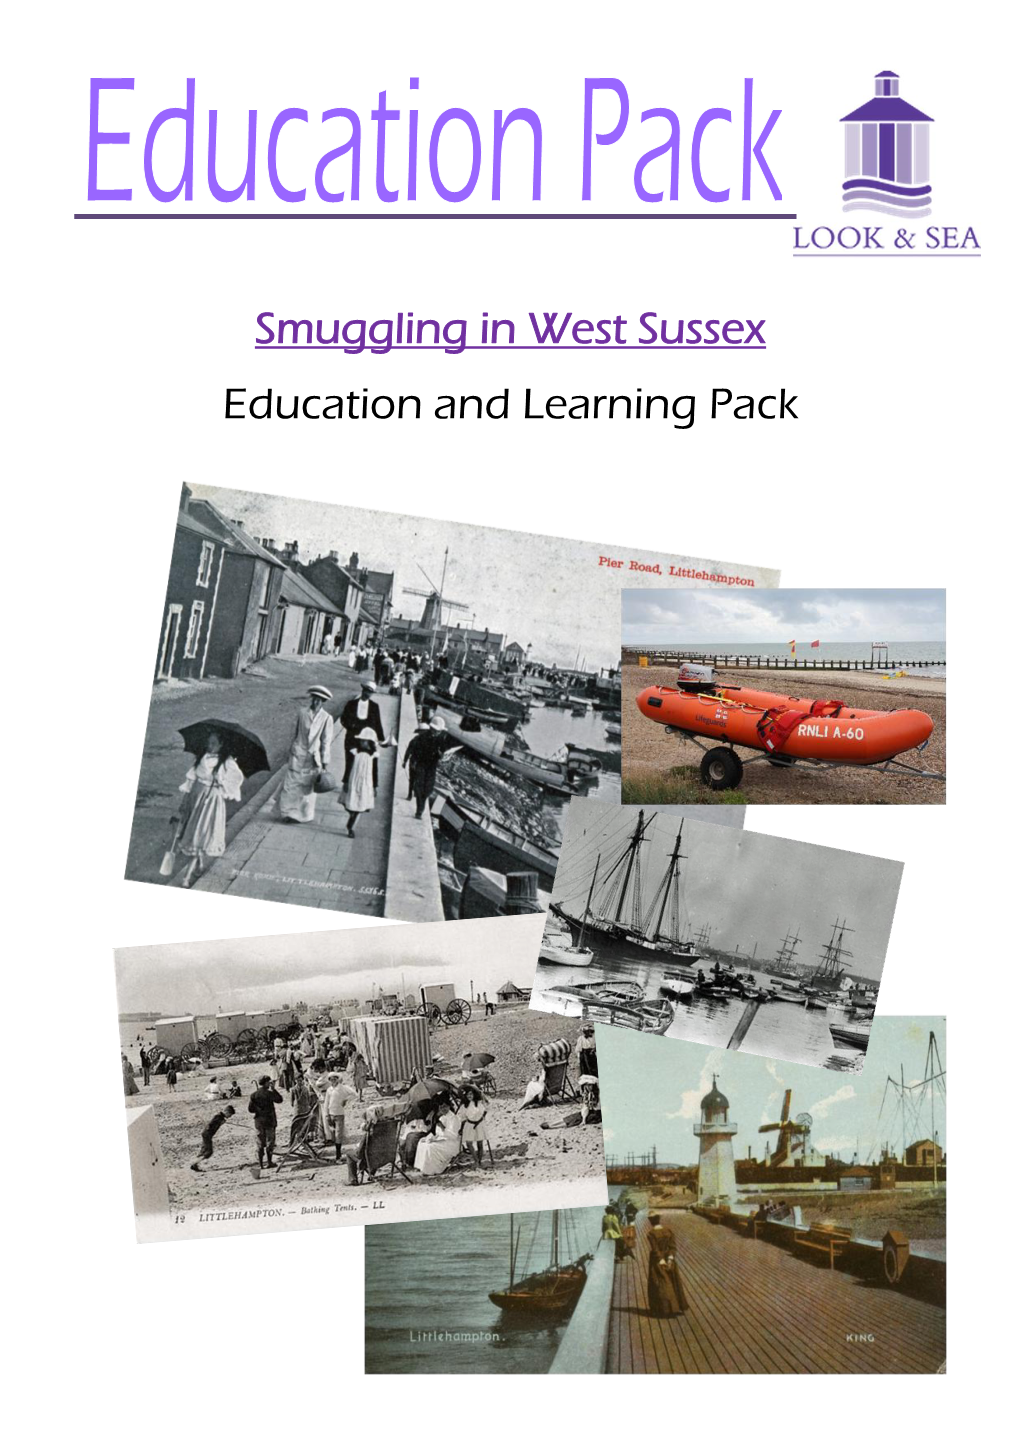 Smuggling in West Sussex Education and Learning Pack